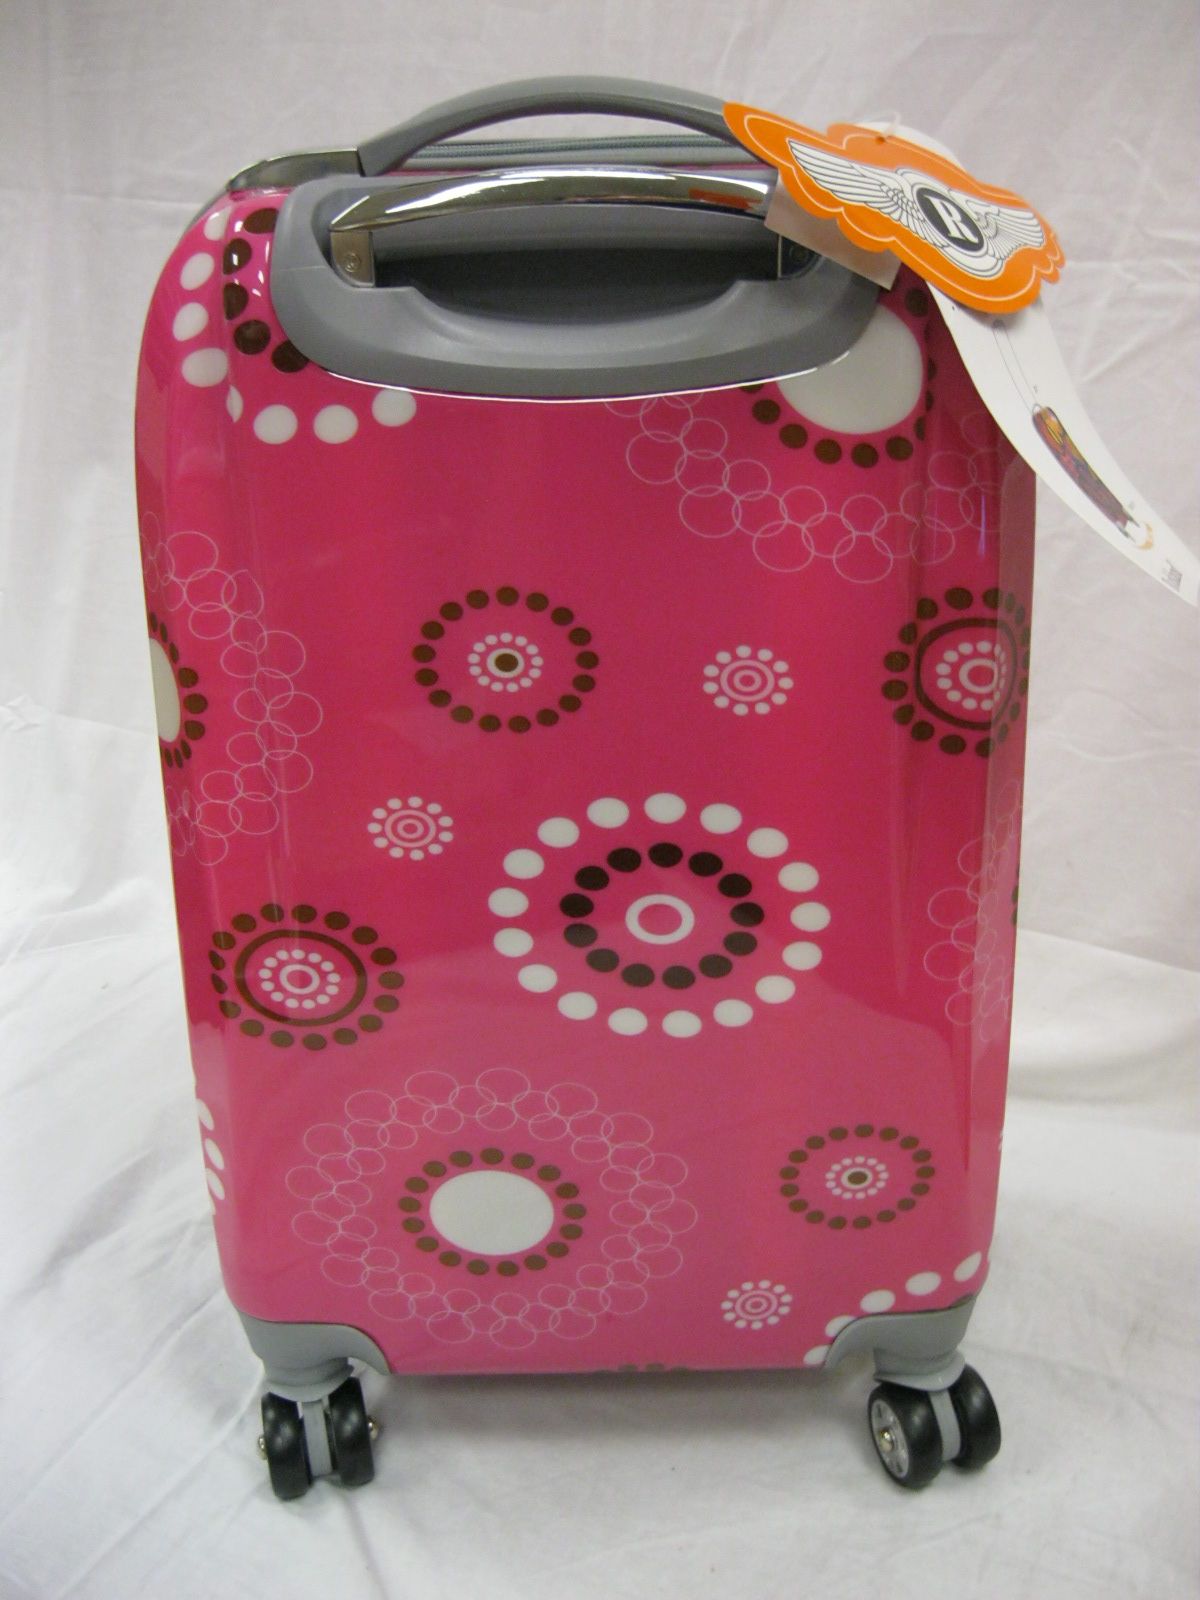 Rockland 20 inch Polycarbonate Swivel Wheeled Carry on Luggage Pink